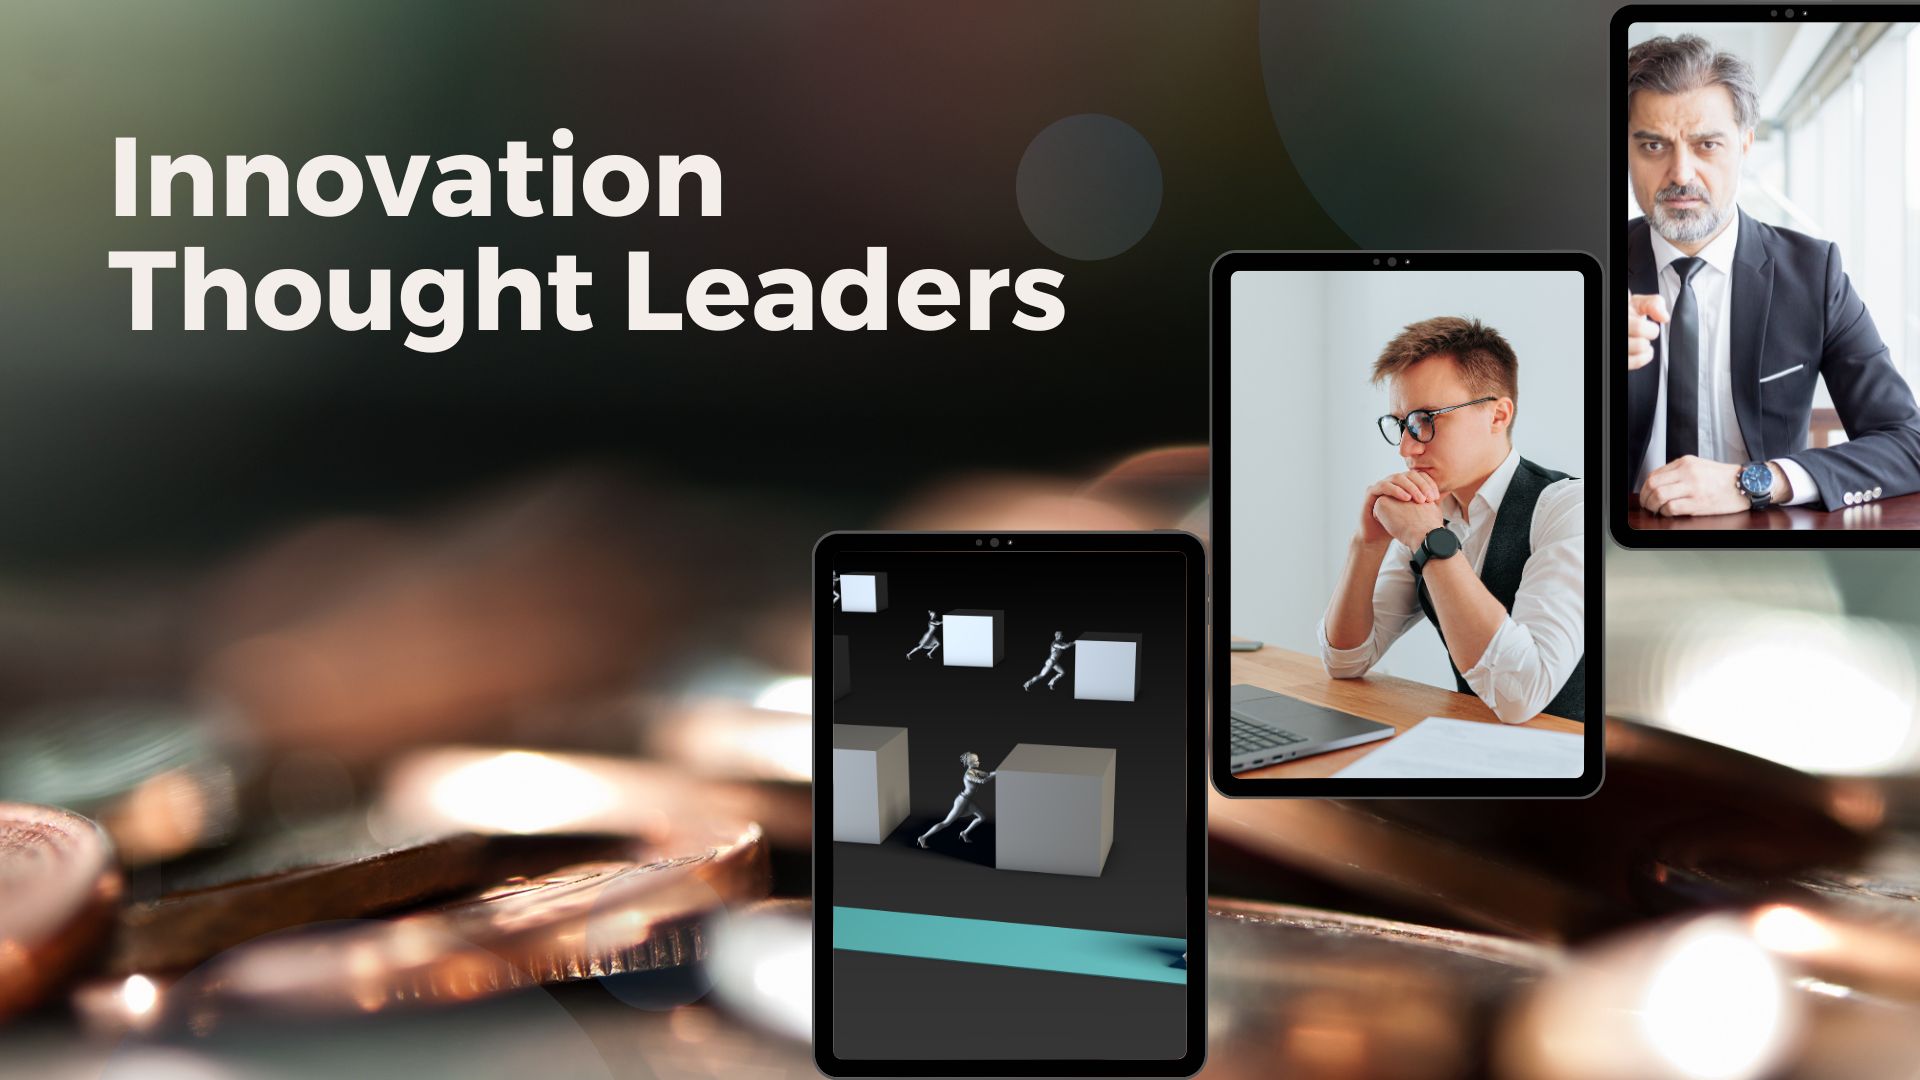 Innovation Thought Leaders